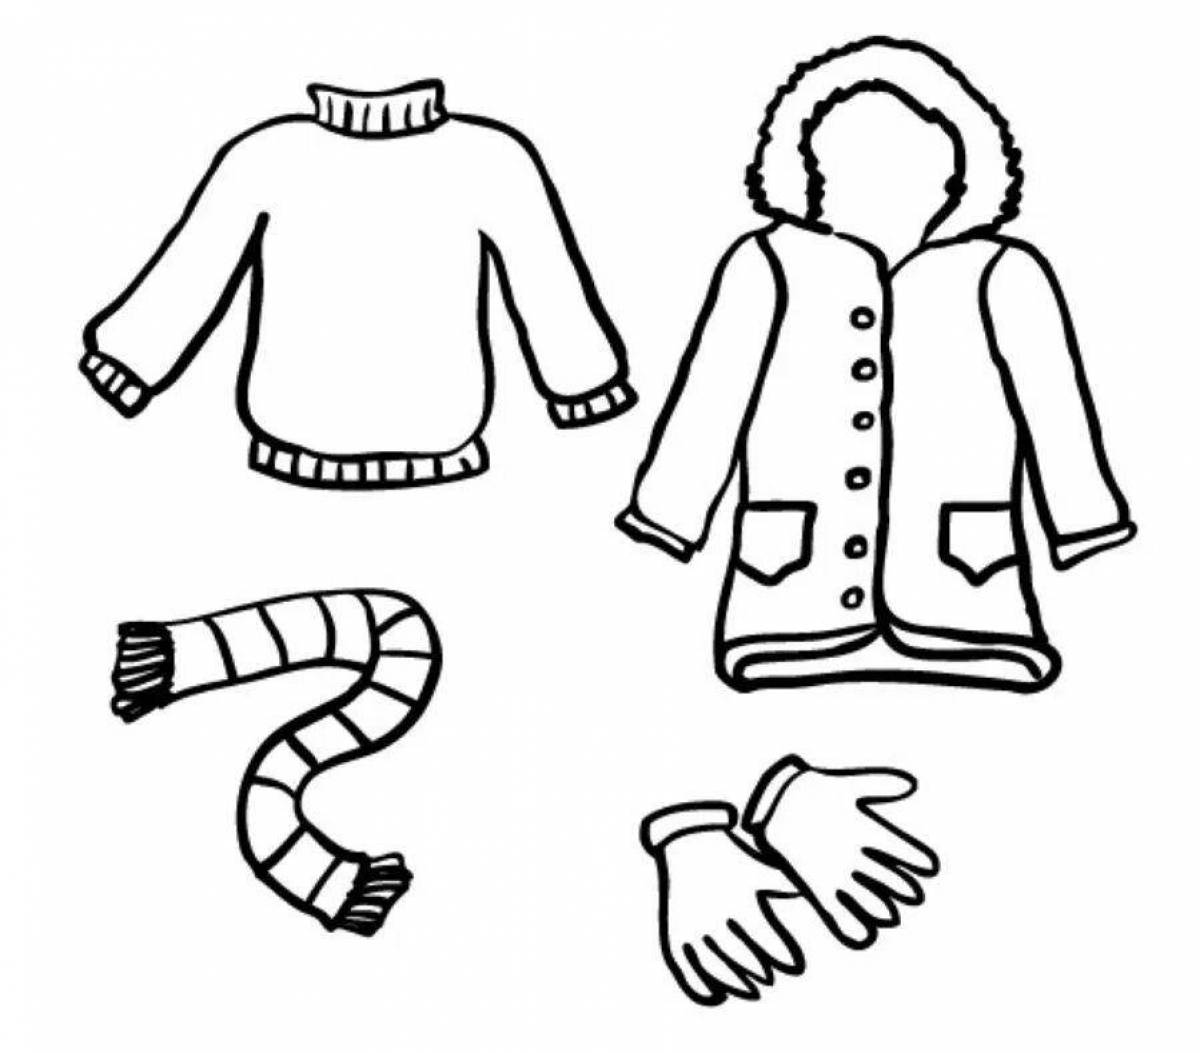 Fun coloring page for winter clothes for 4-5 year olds